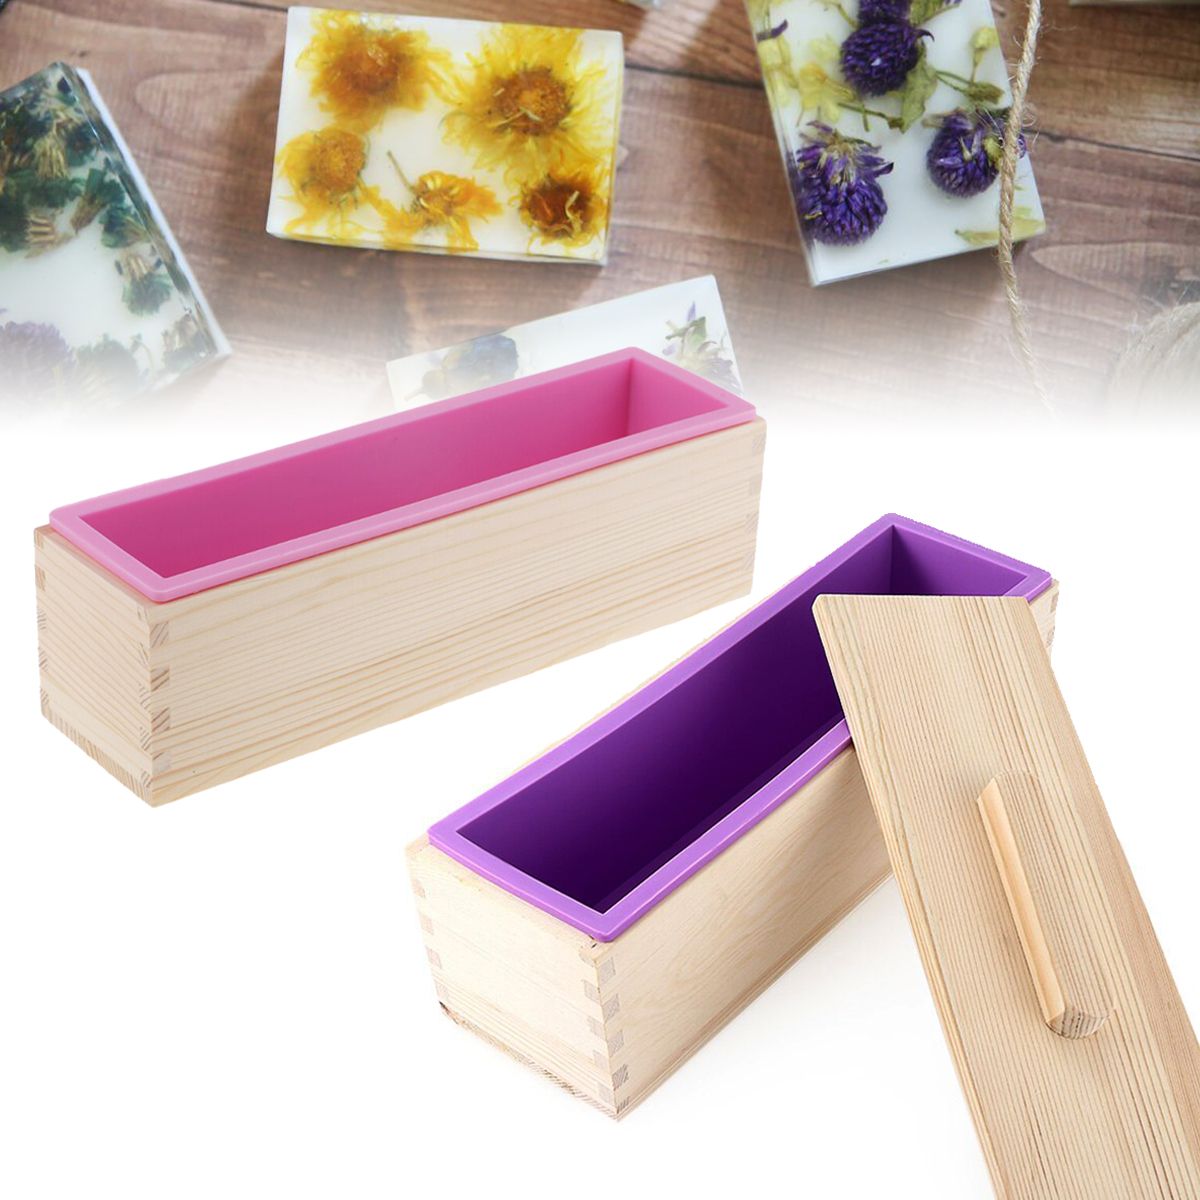 New-Wood-Loaf-Soap-Mould-with-Silicone-Mold-Cake-Making-Wooden-Box-Soap-1602226